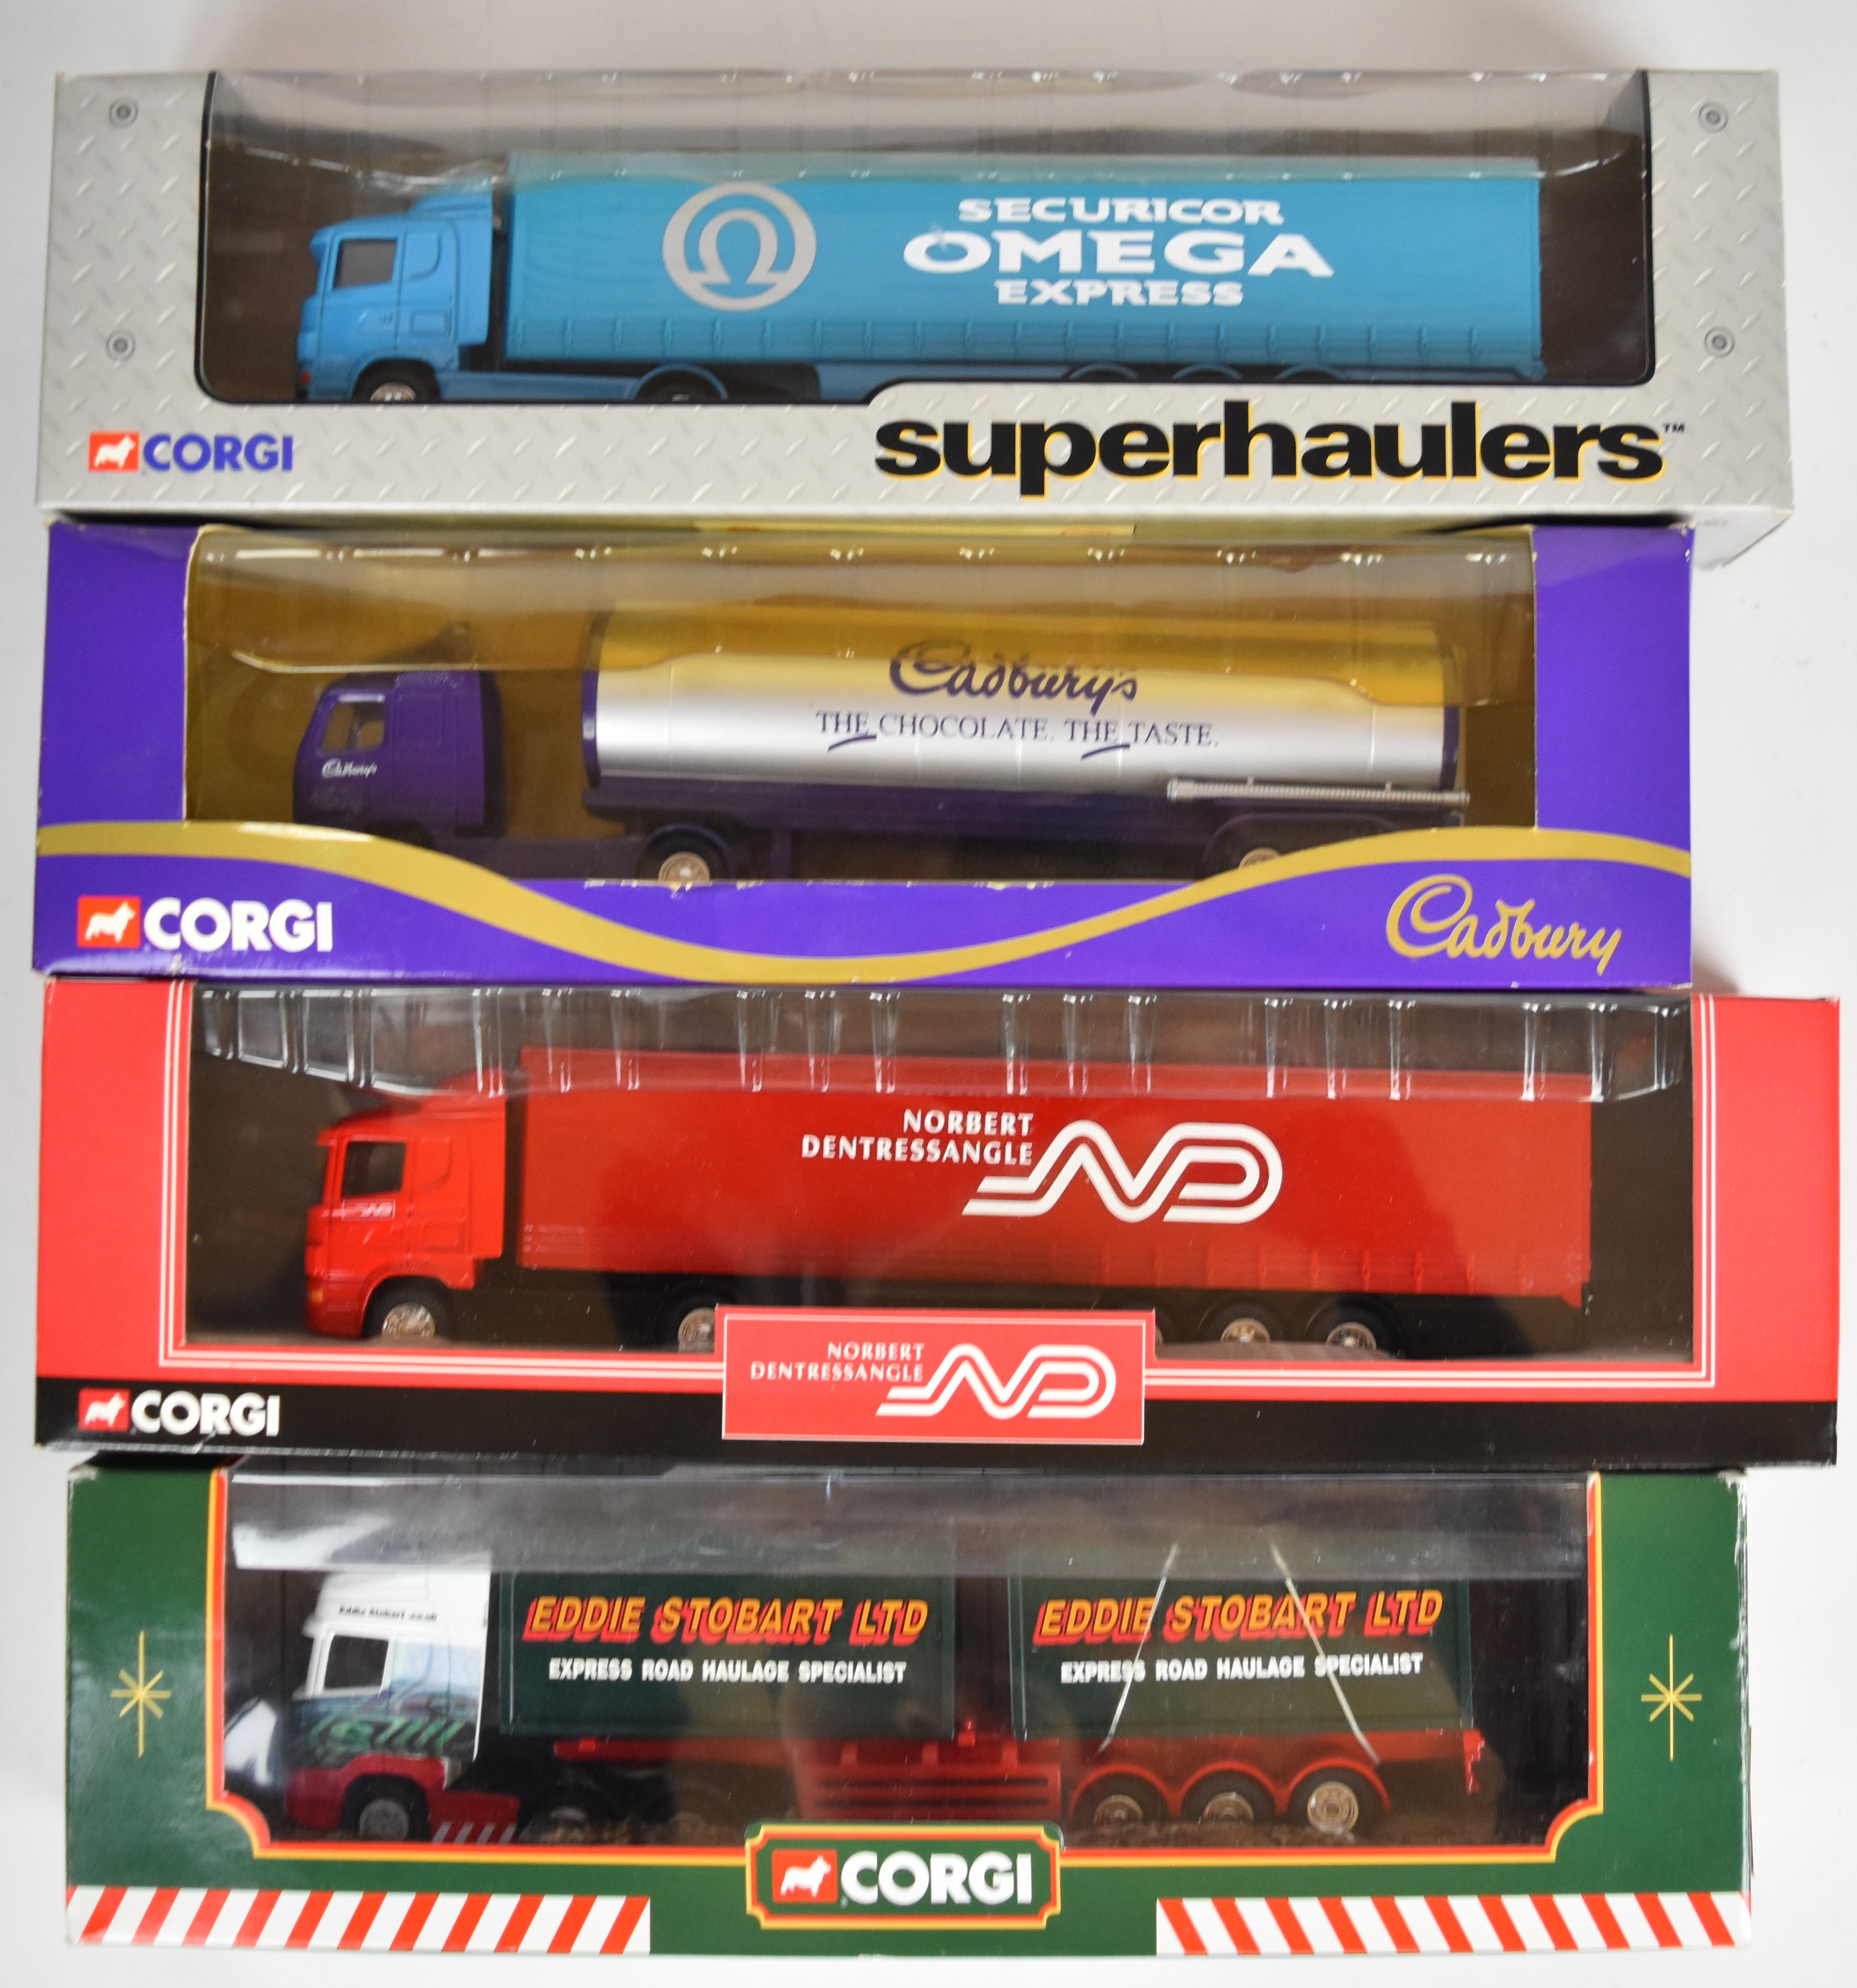 Over thirty Corgi diecast model cars and haulage vehicles, series to include Superhaulers, - Image 5 of 6